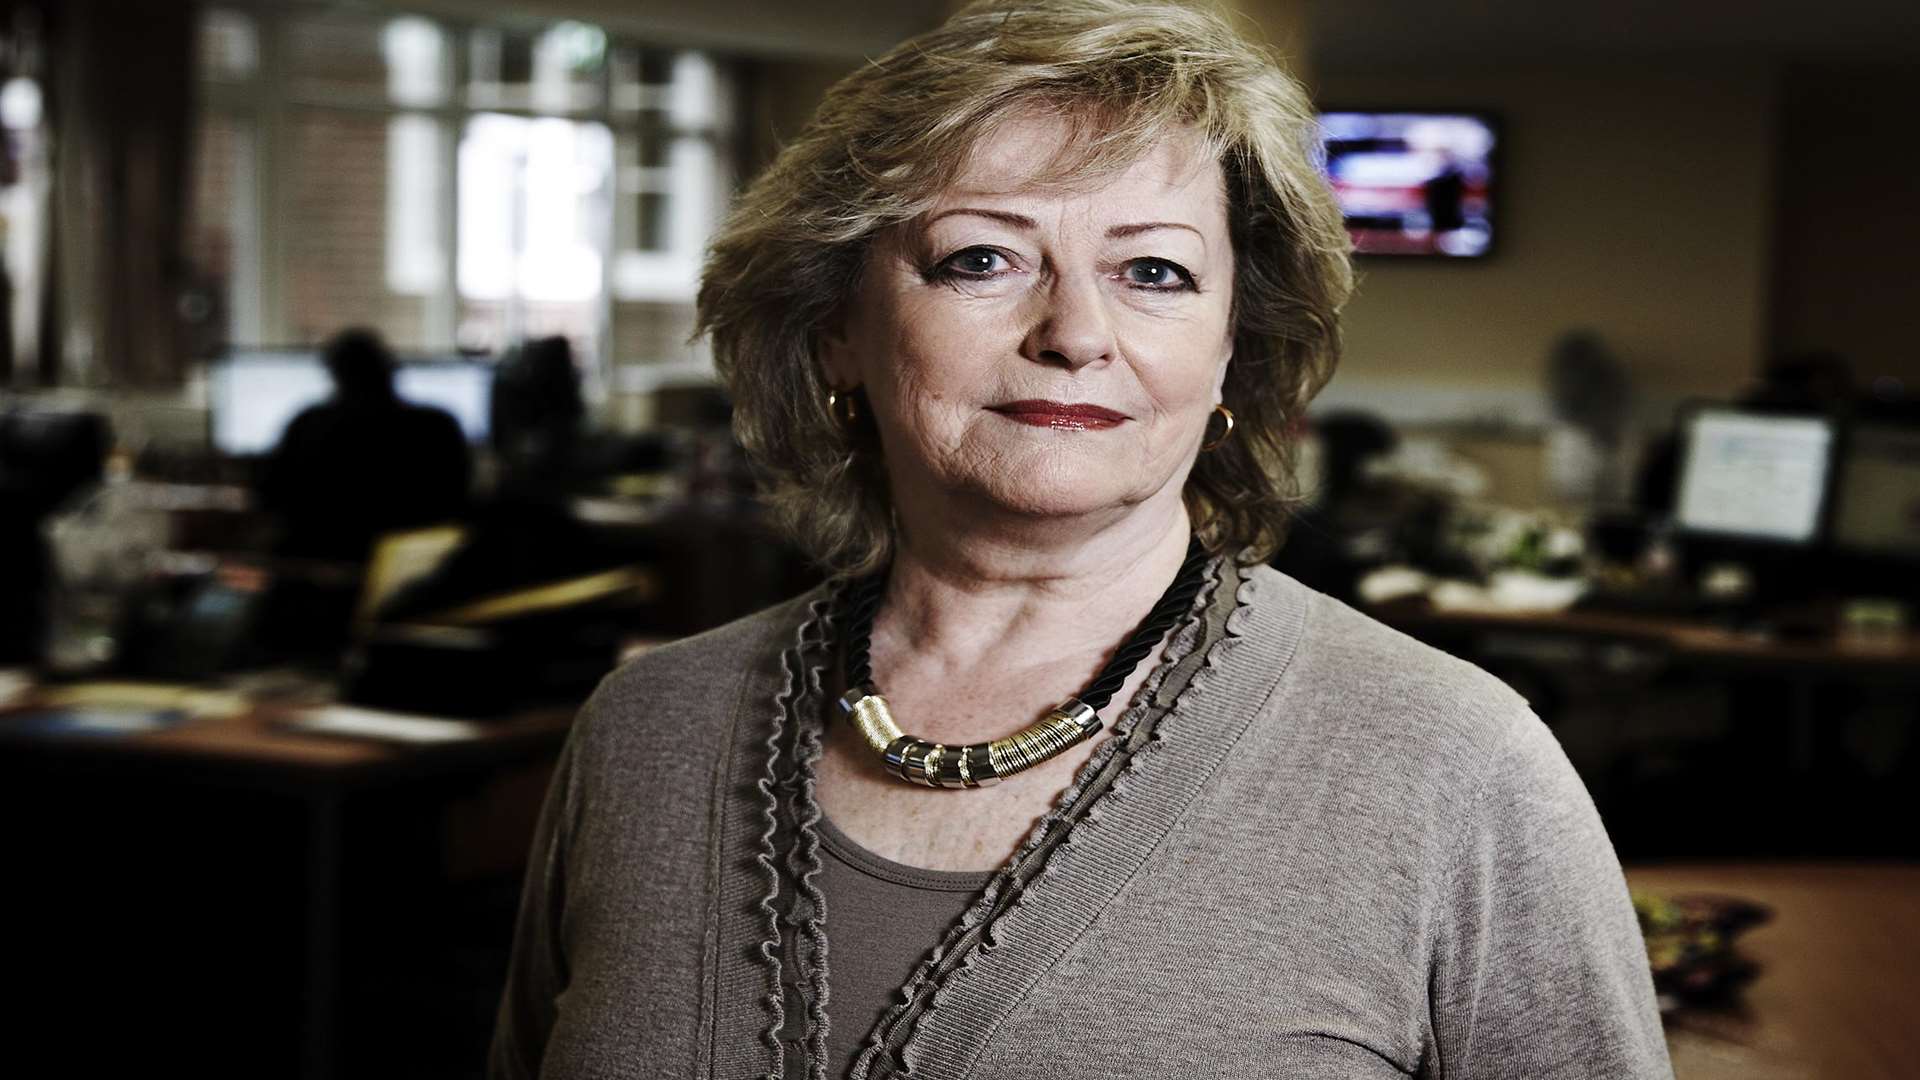 Kent police and crime commissioner Ann Barnes when she appeared in a TV documentary. Picture: Channel 4/Richard Ansett